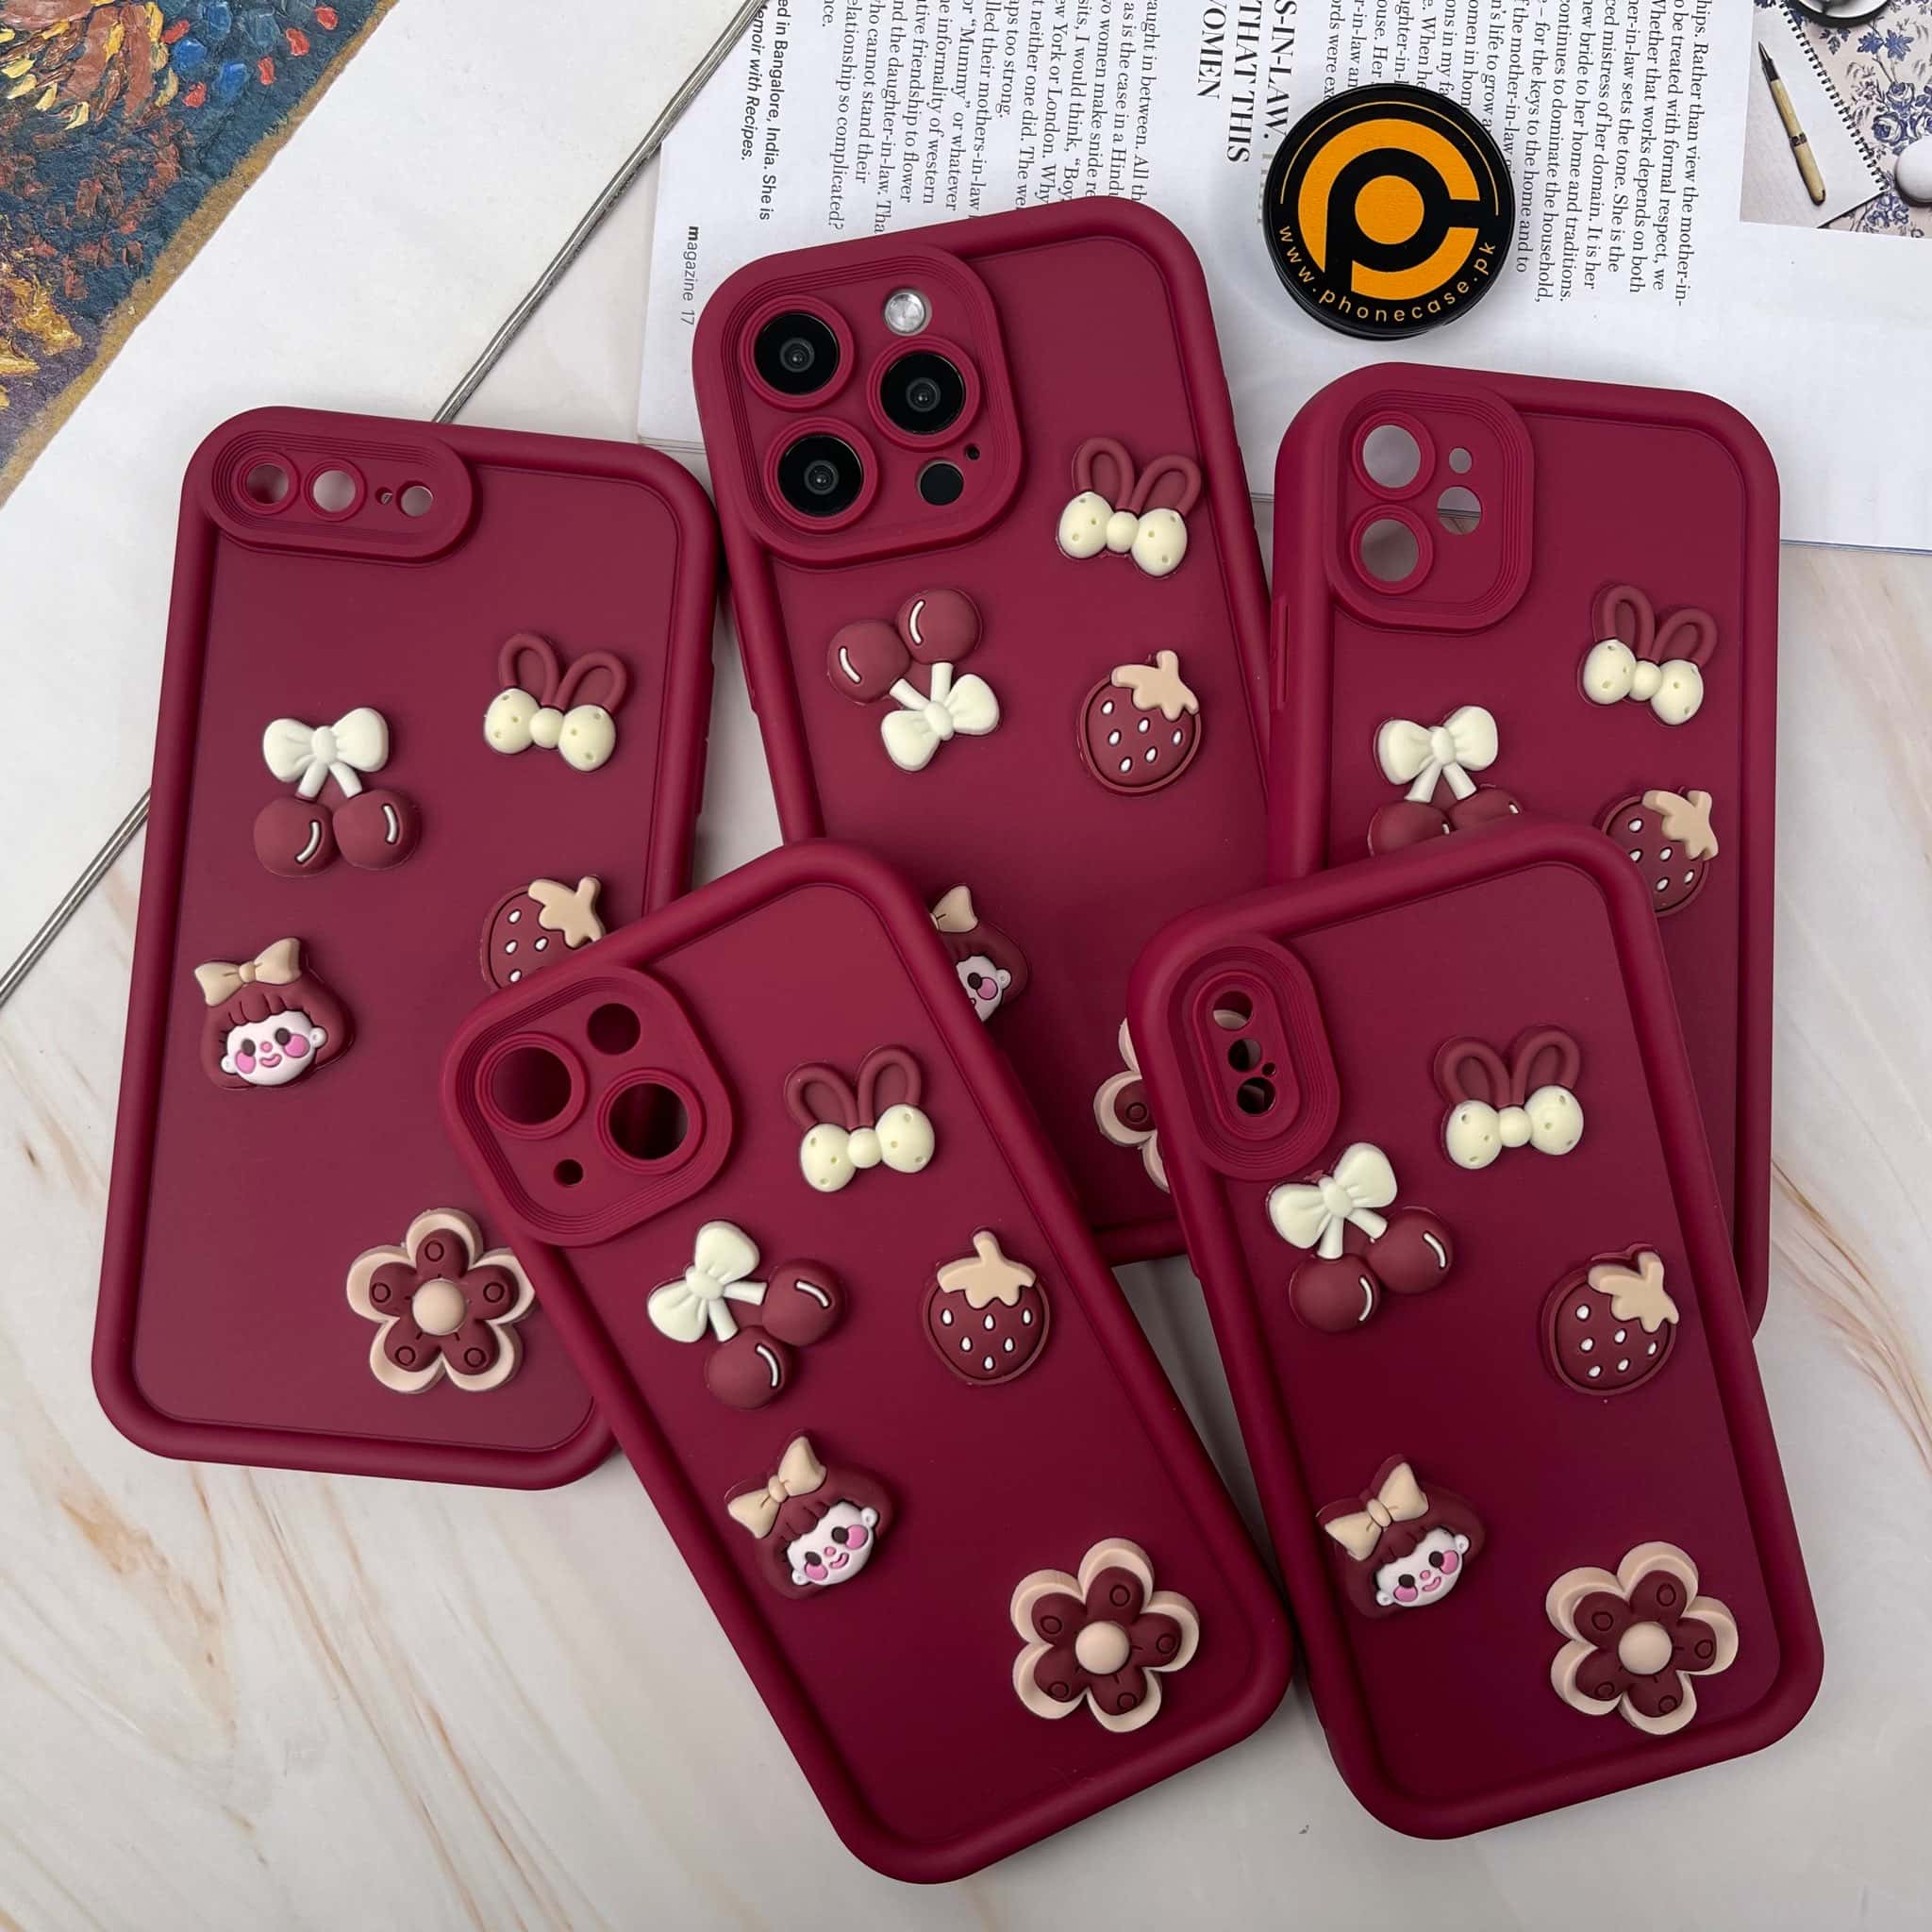 iPhone XS Max Cute 3D Cherry Flower Icons Silicon Case